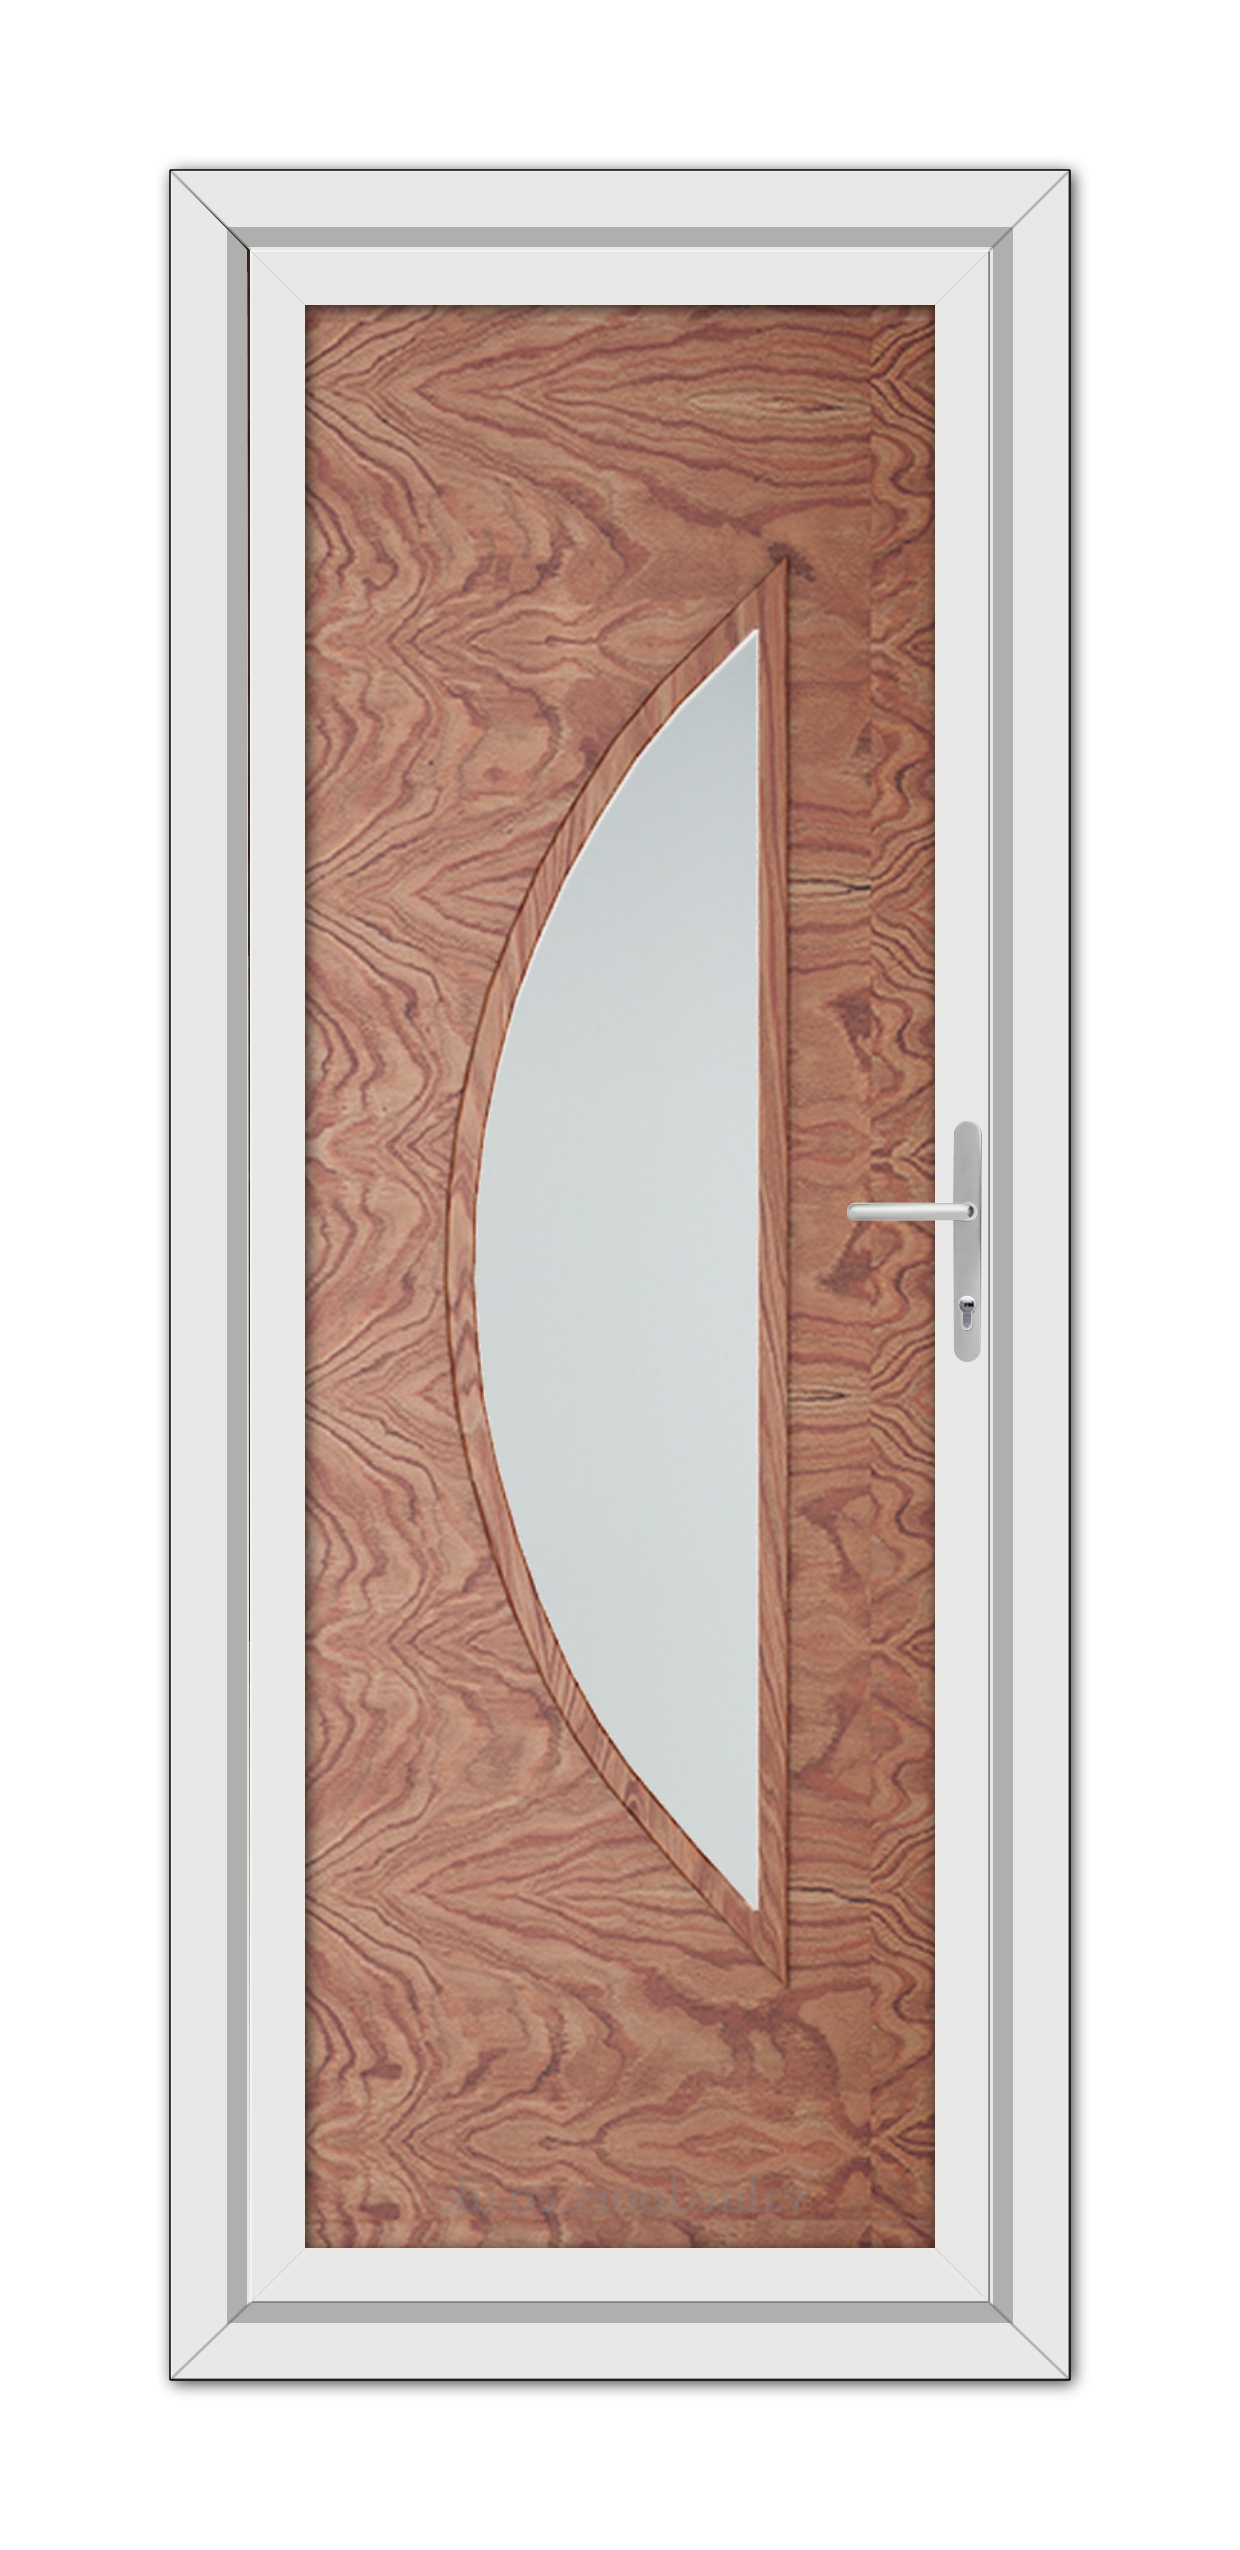 A Solid Oak Modern 5051 uPVC Door with a curved glass panel.